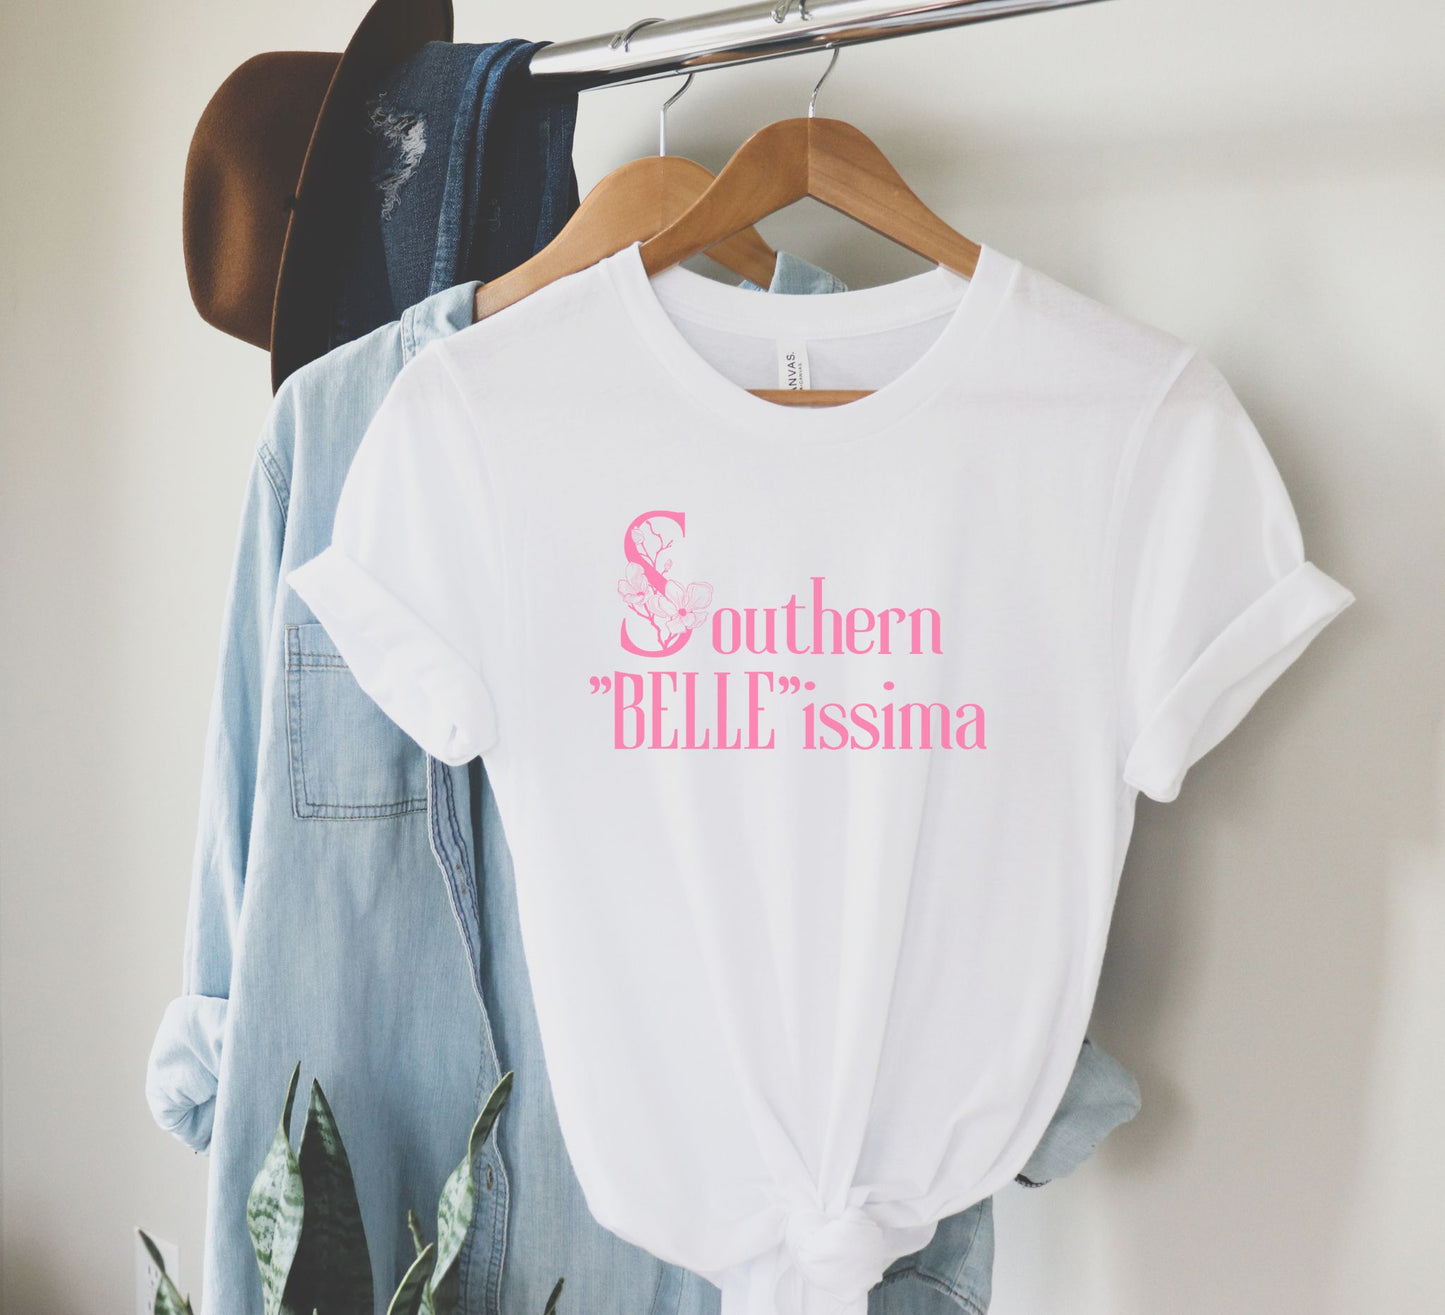 Southern "Belle"issima T-Shirt - Branching Up